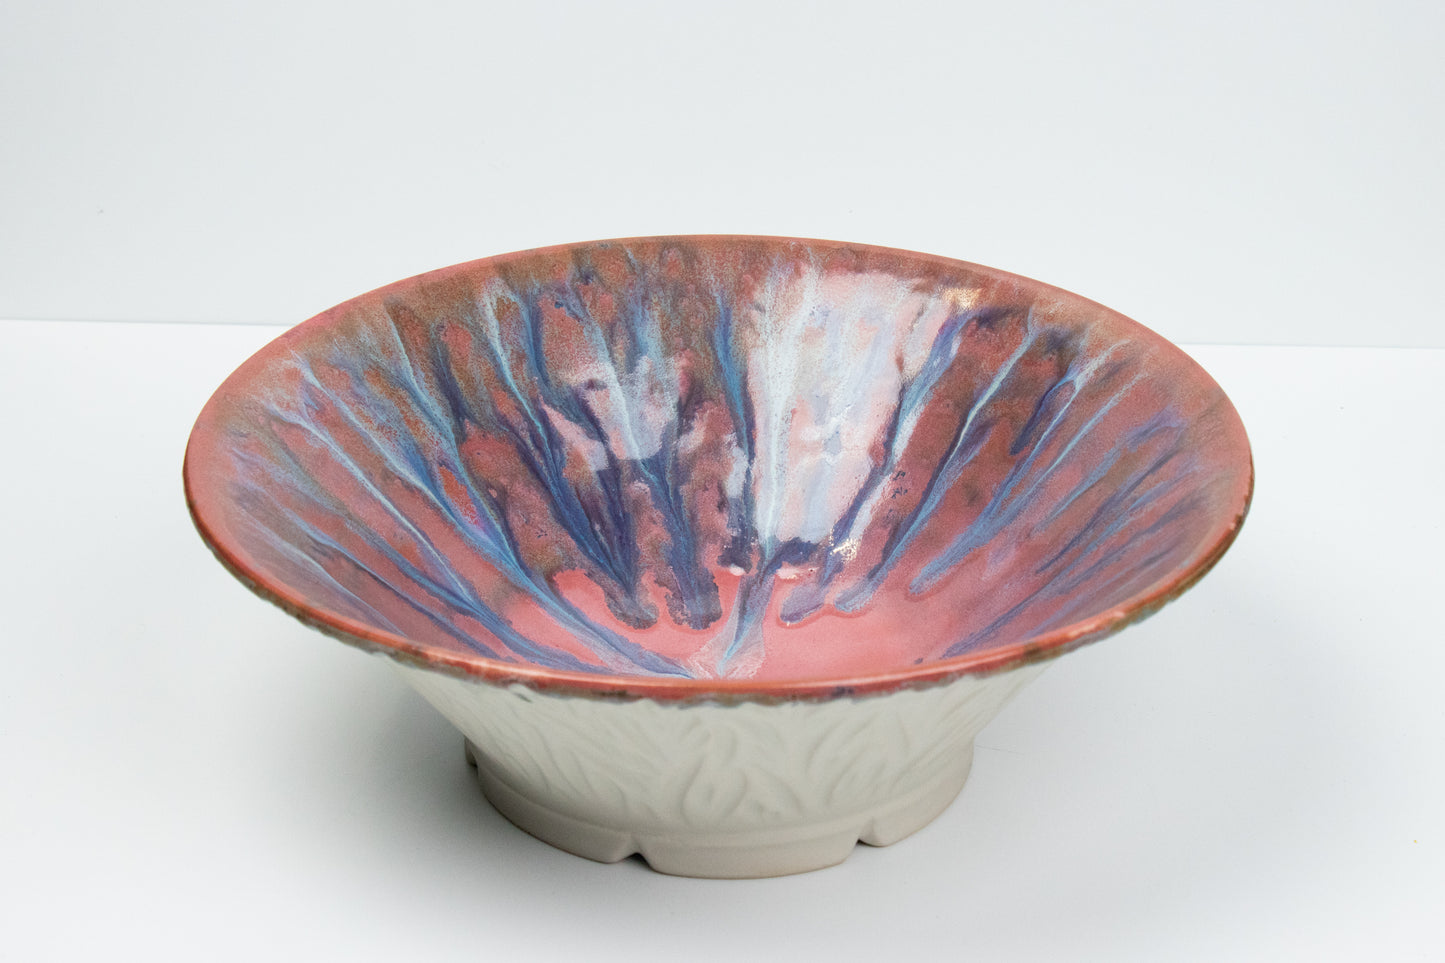 Carved White Bowl with Drippy Pink Glaze